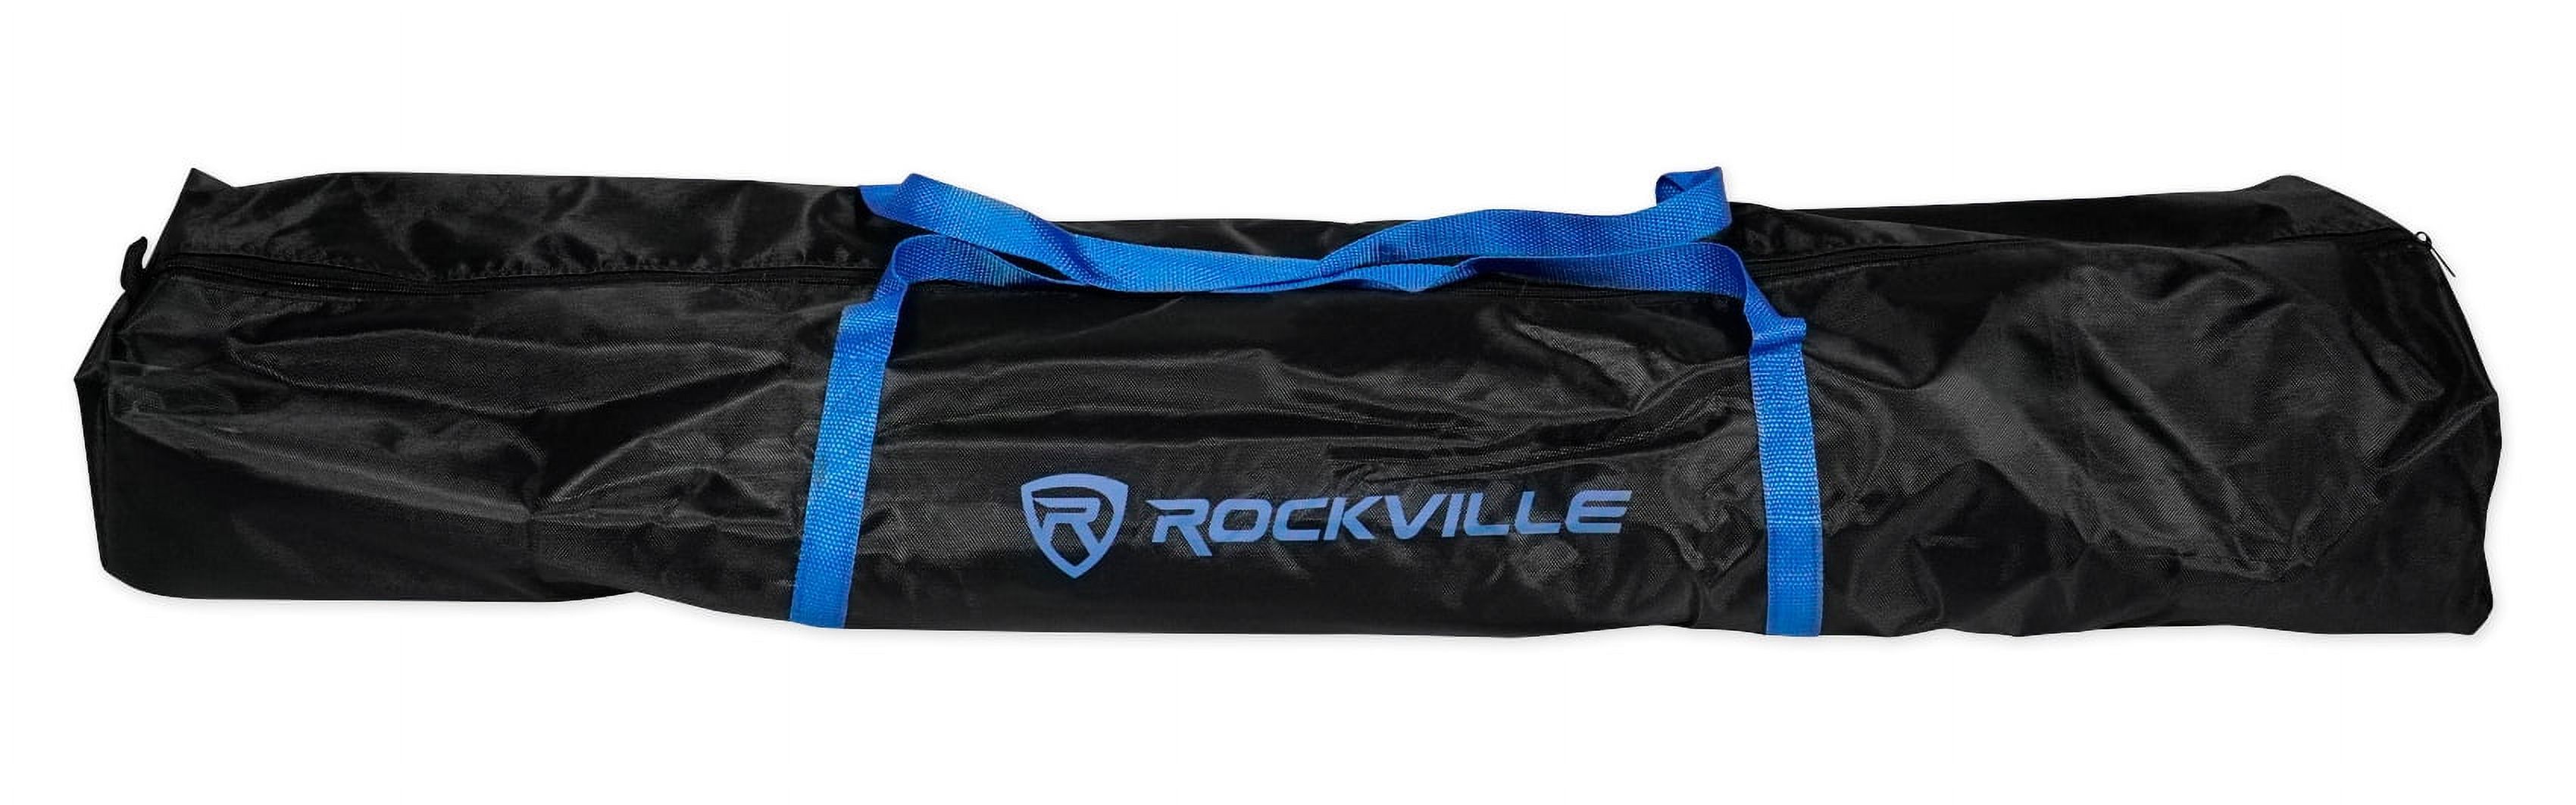 2 Rockville SPGN158 15" Passive 1600W ABS Plastic PA Speakers+Stands+Cables+Bags - image 5 of 25